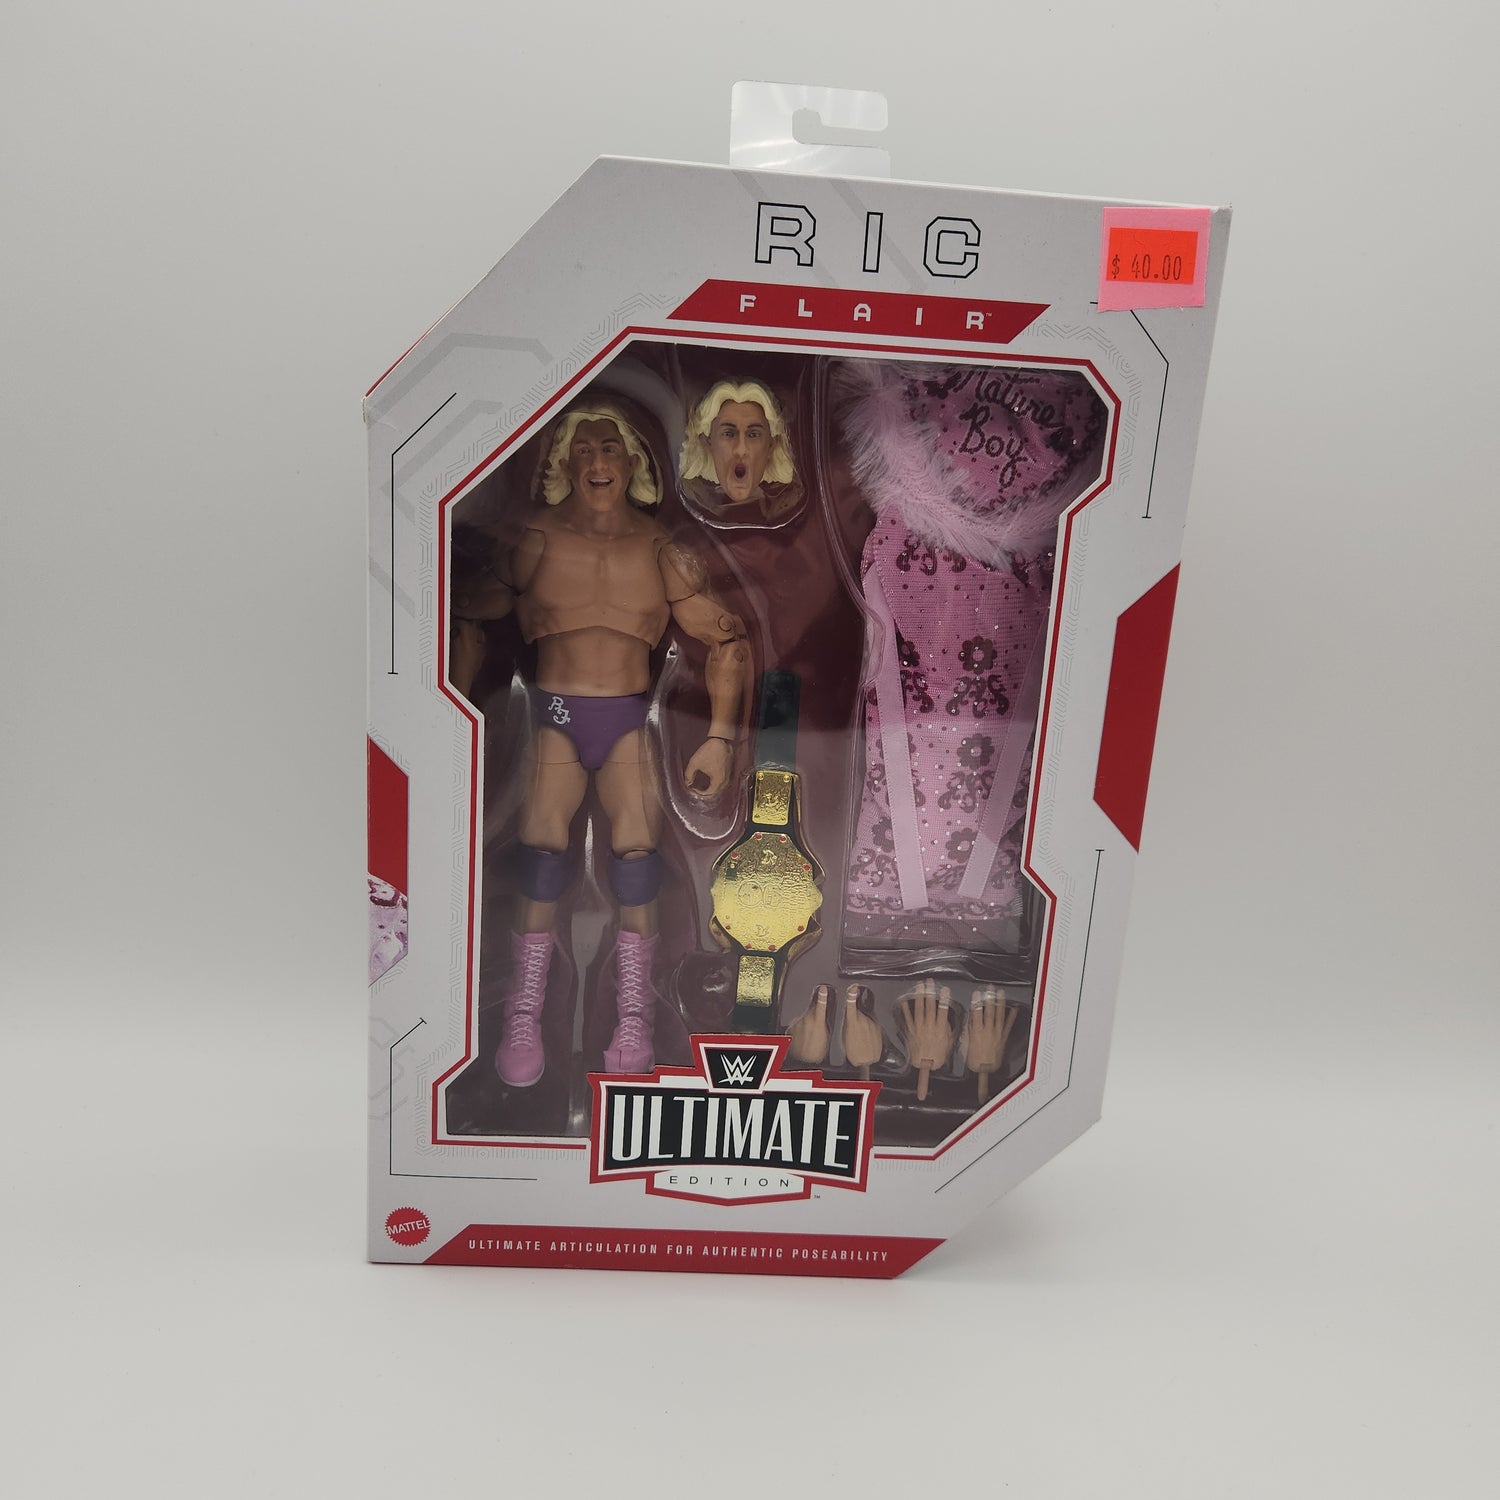 The front of the box. The bubble is intact and sealed. The action figure inside is a tan man wearing a purple speedo, pink boots, and has yellow hair. 